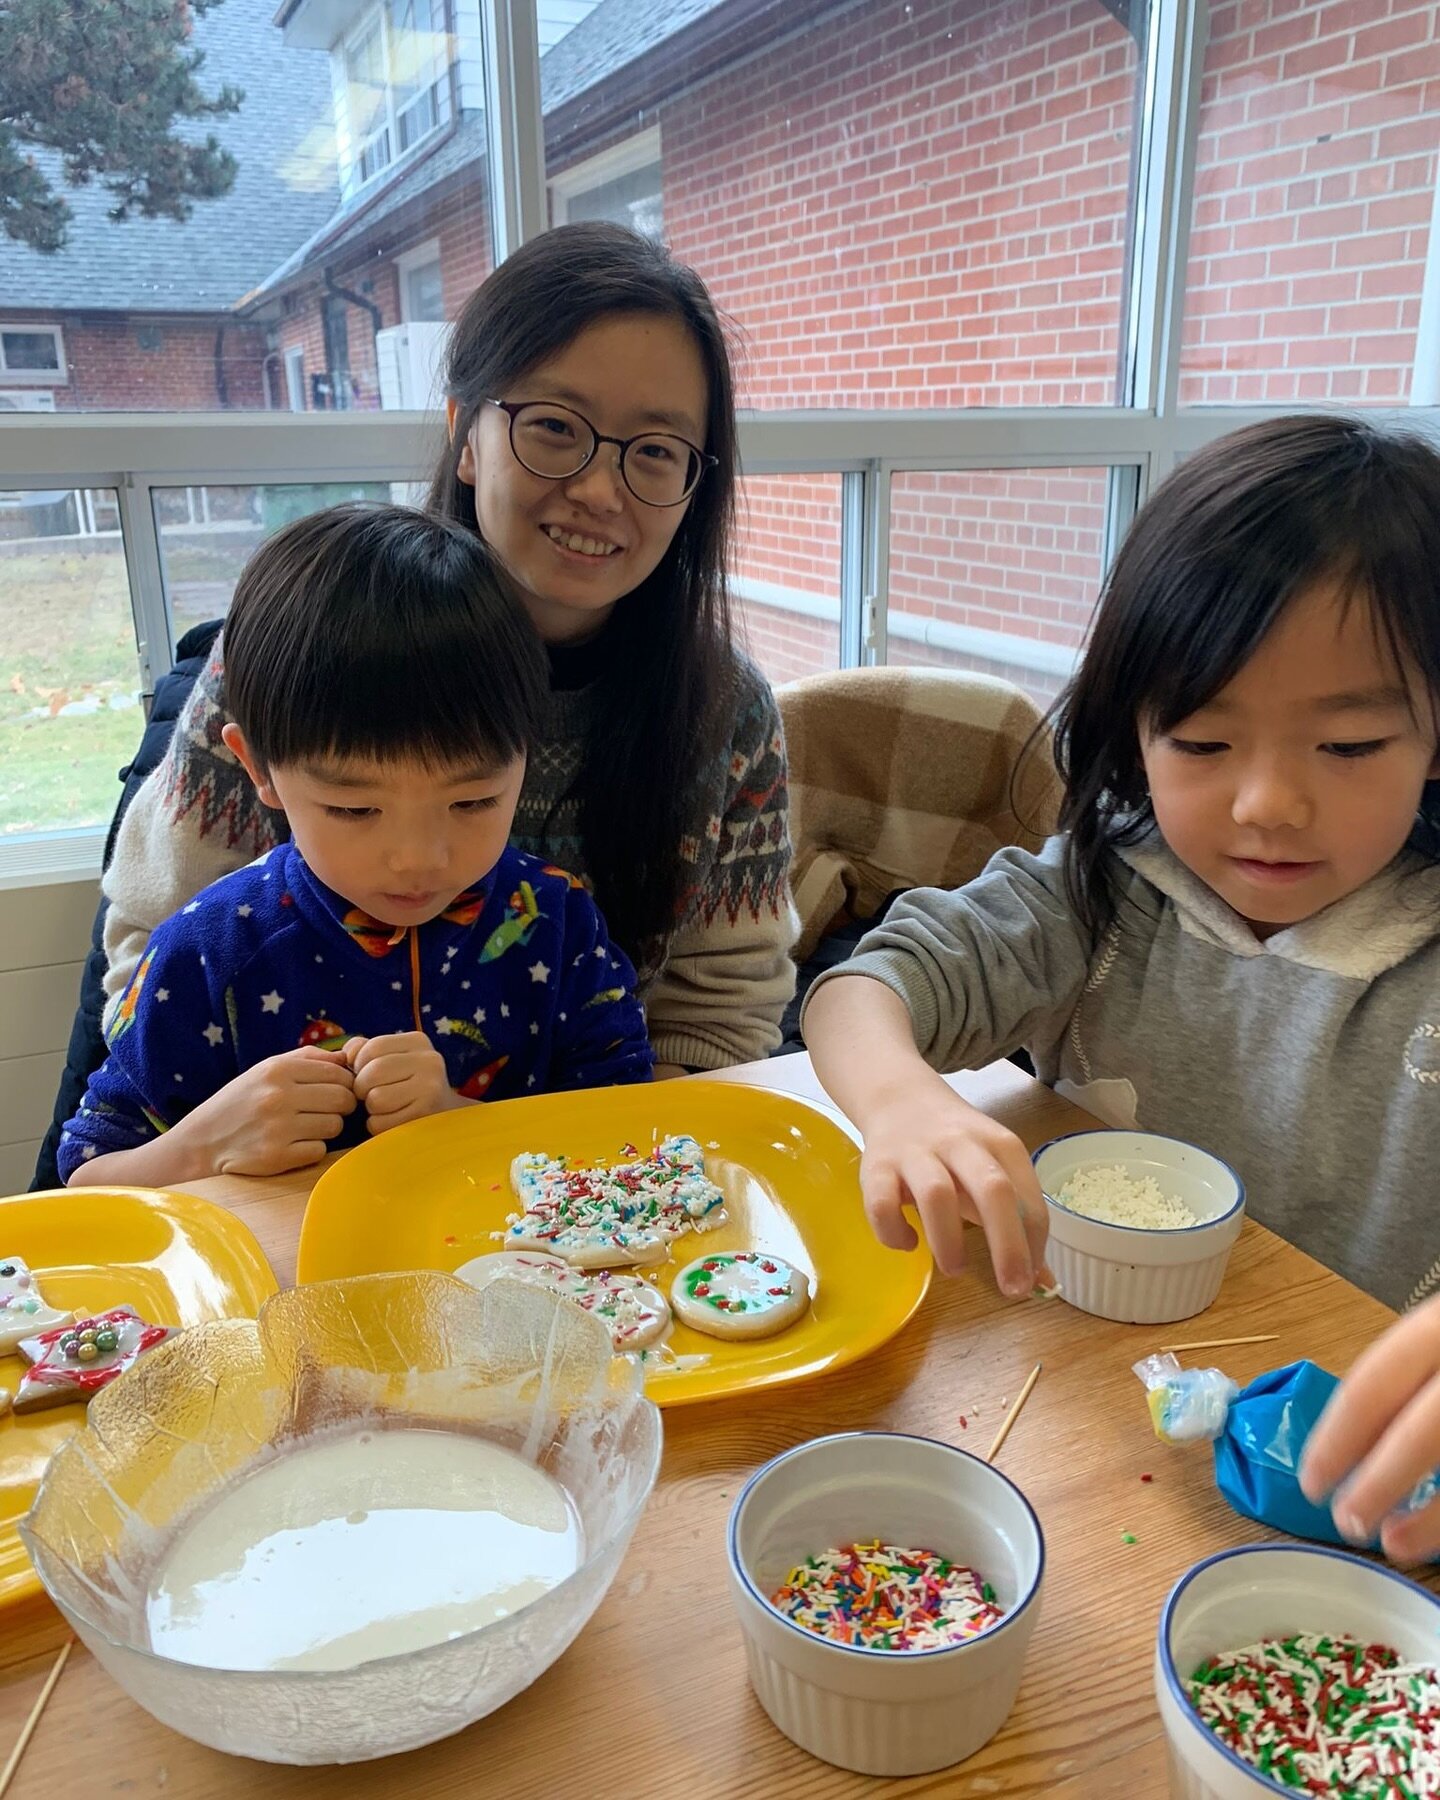 The kids (and mom) had fun at the Christmas cookie workshop!